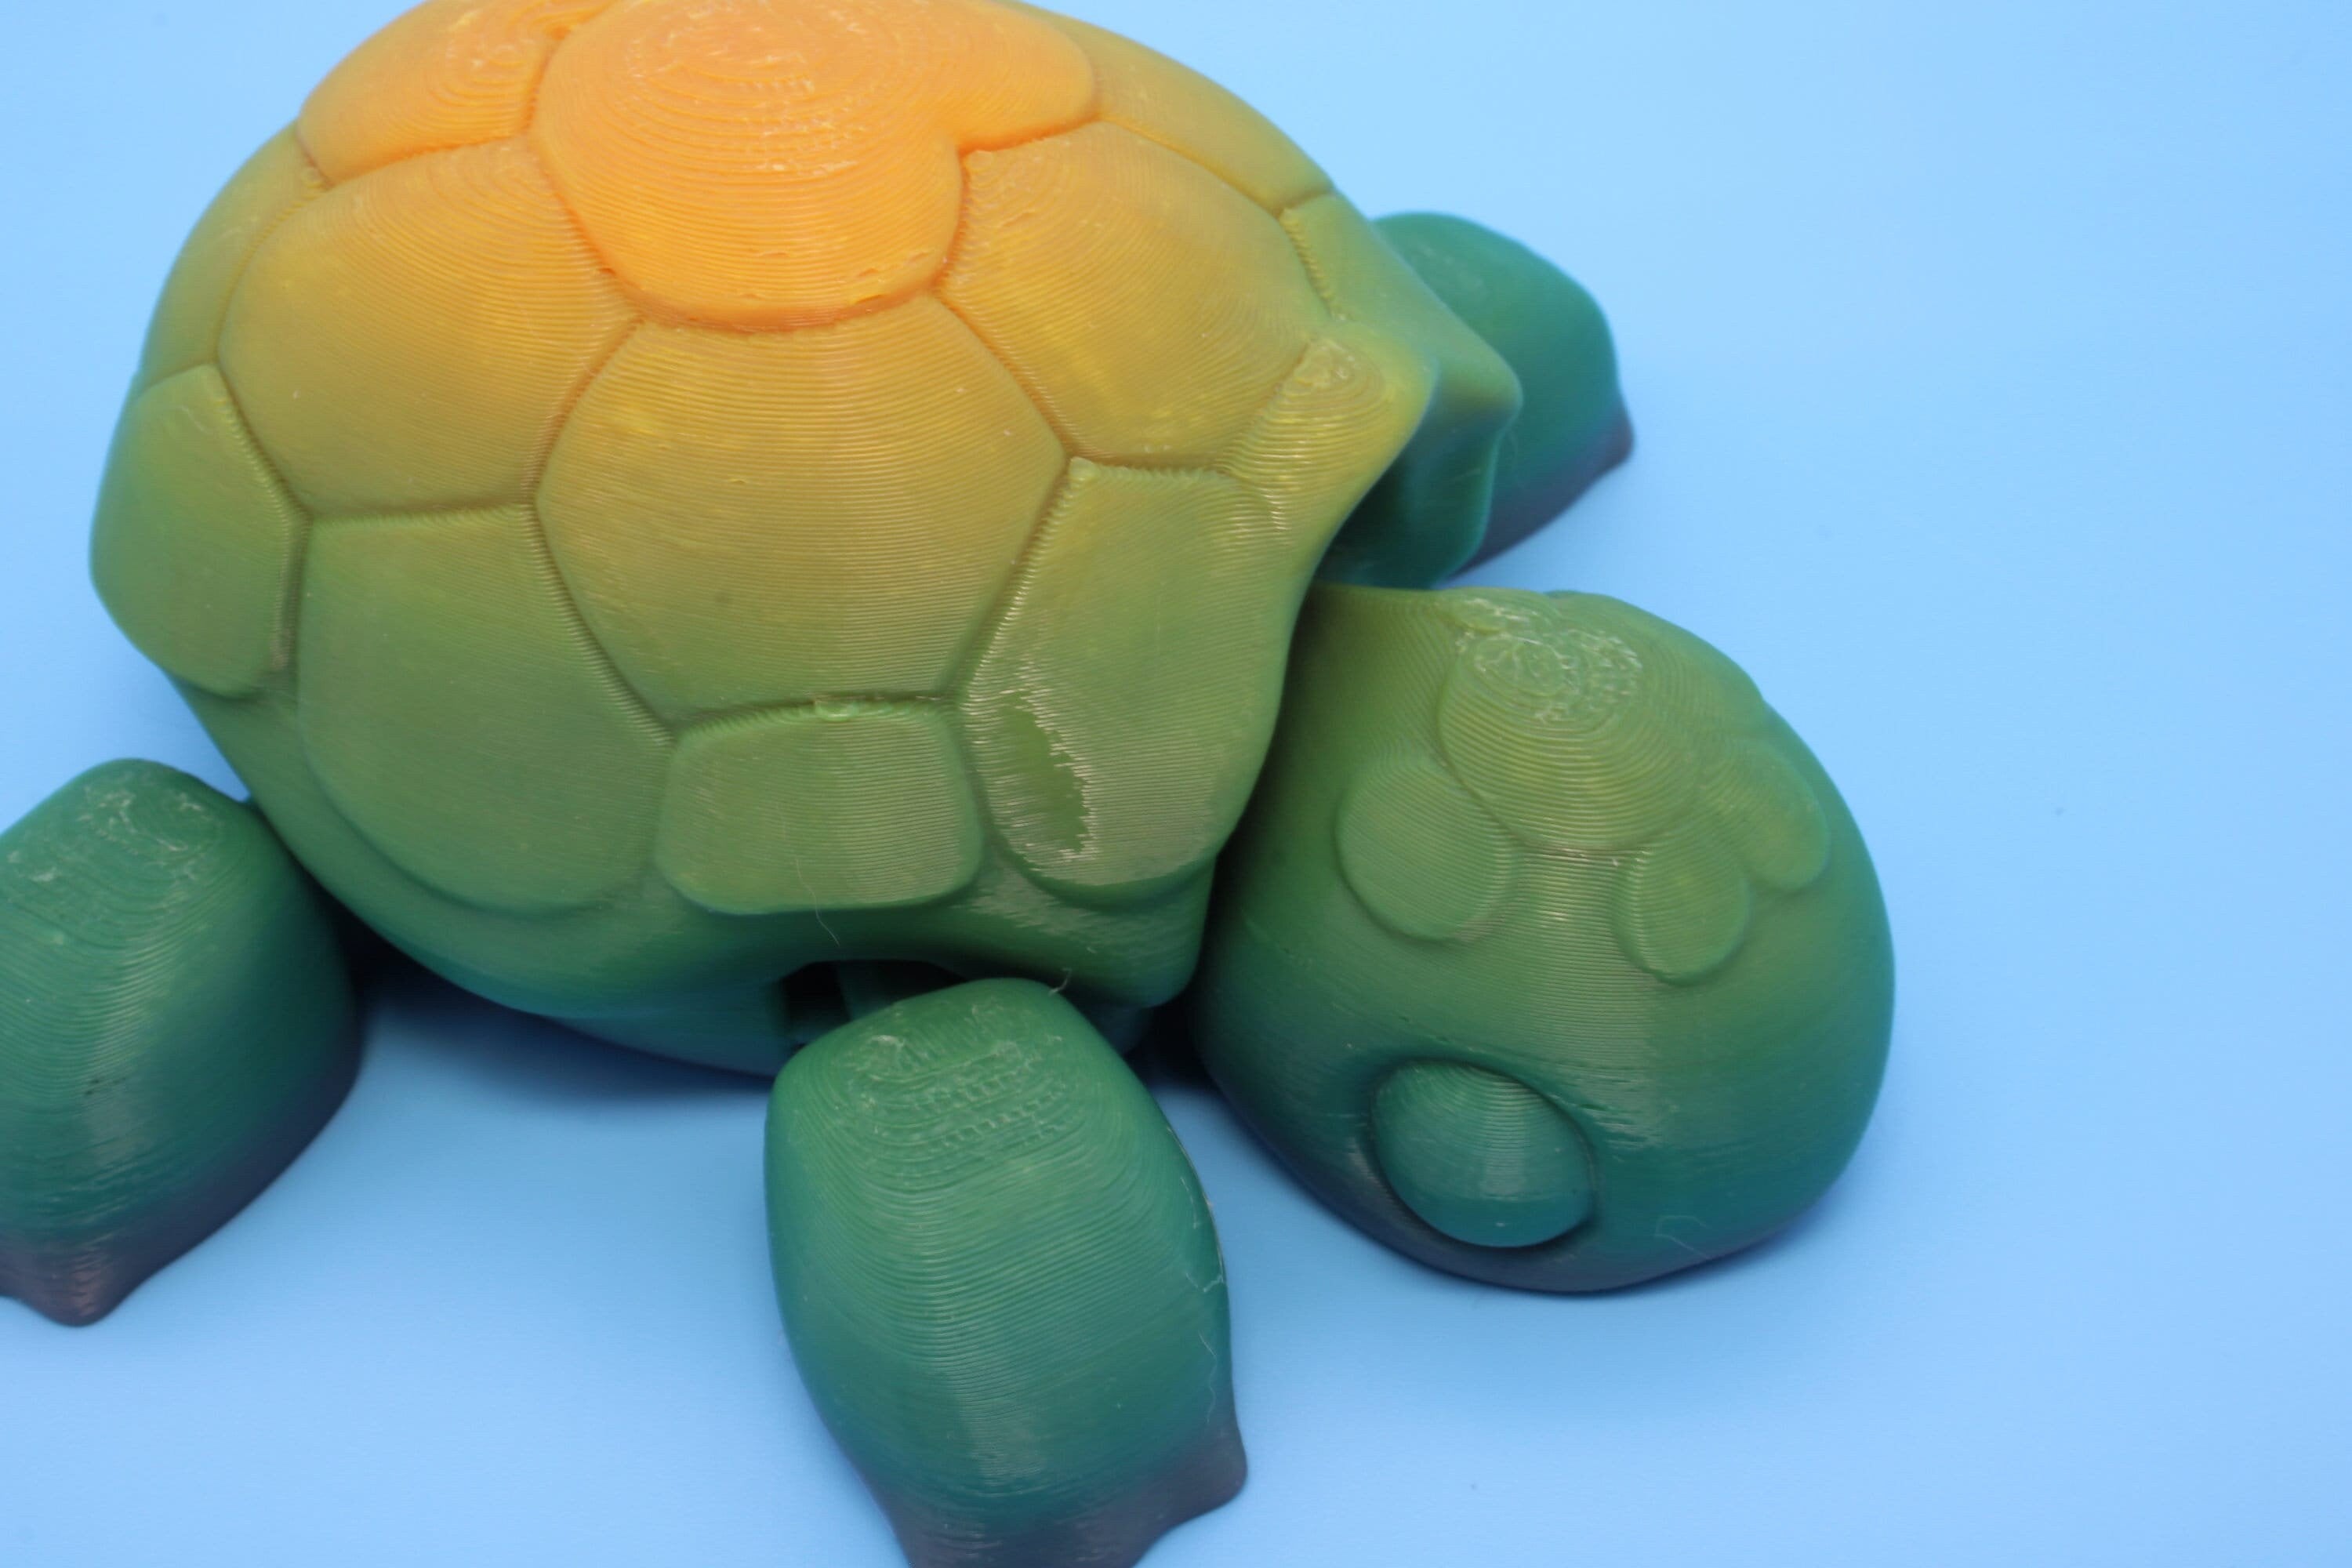 Articulating Turtle | 3D Printed Cute Turtle with heart on shell | Friendly Reptile | Sensory Toy | Fidget Toy | Articulating Turtle | Stim.